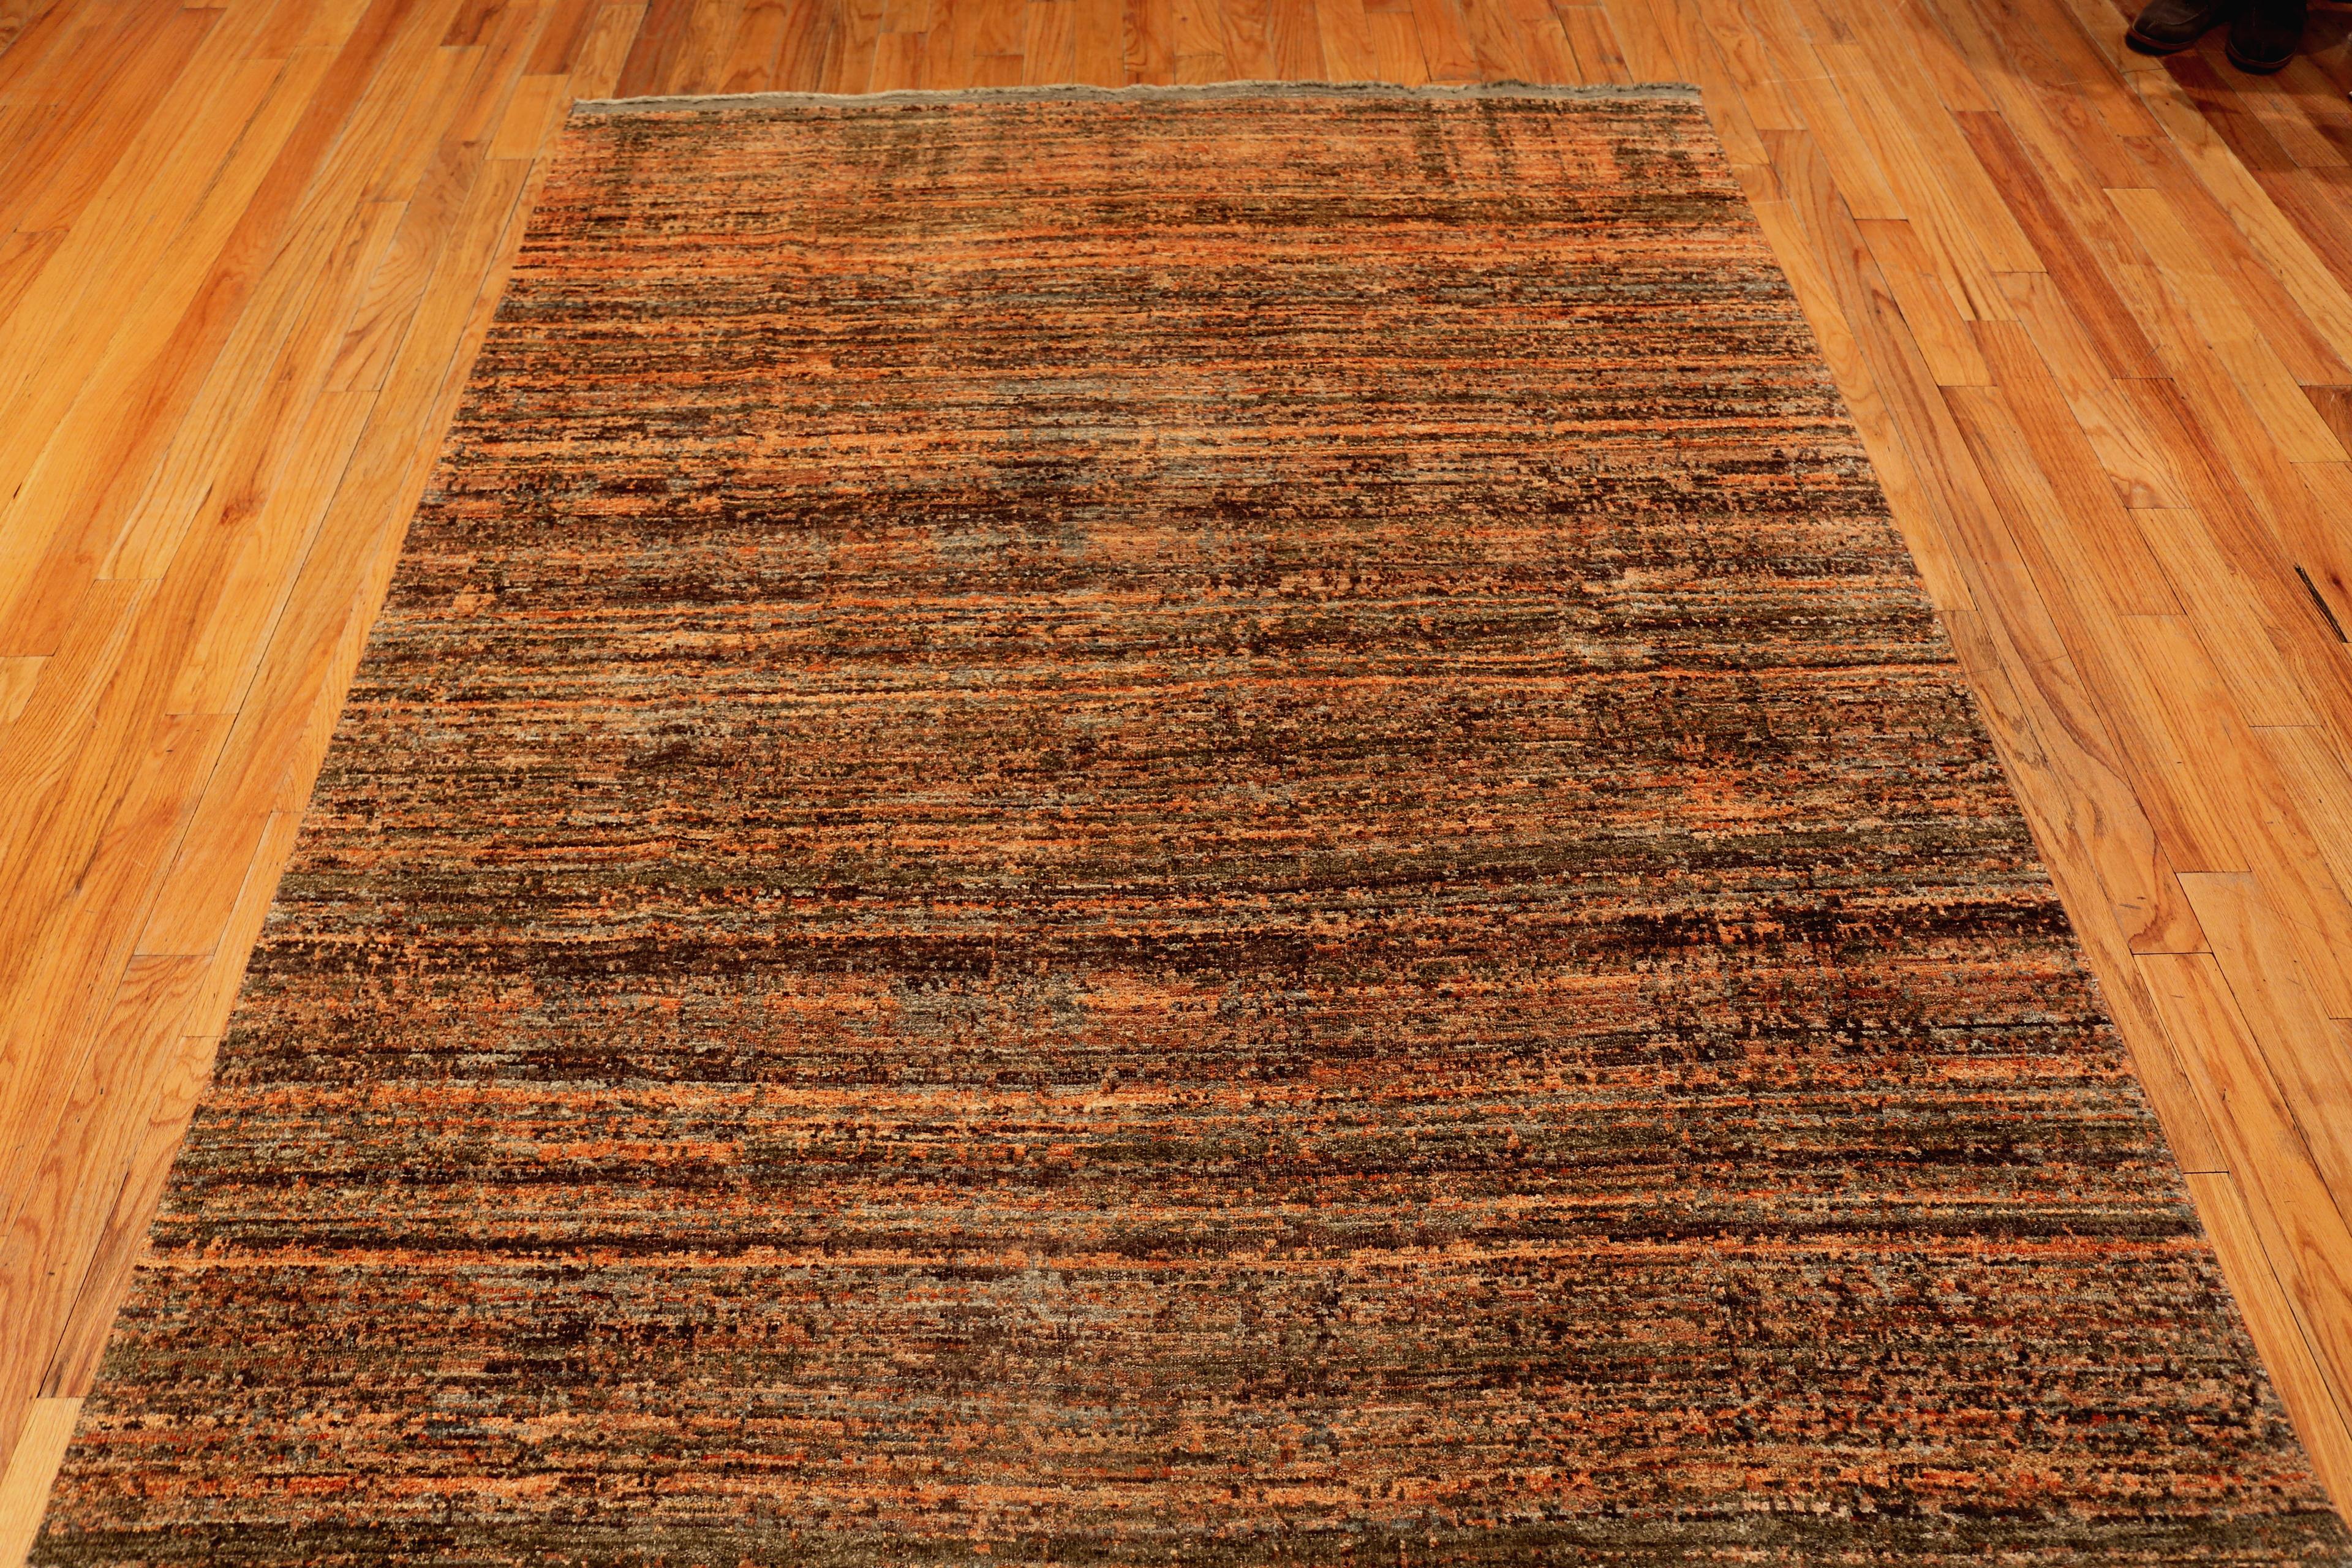 Collection Nazmiyal - Tapis Wabi Sabi moderne et transitionnel. 6 ft x 11 ft 7 in (1,83 m x 3,53 m). Date approximative : Moderne 